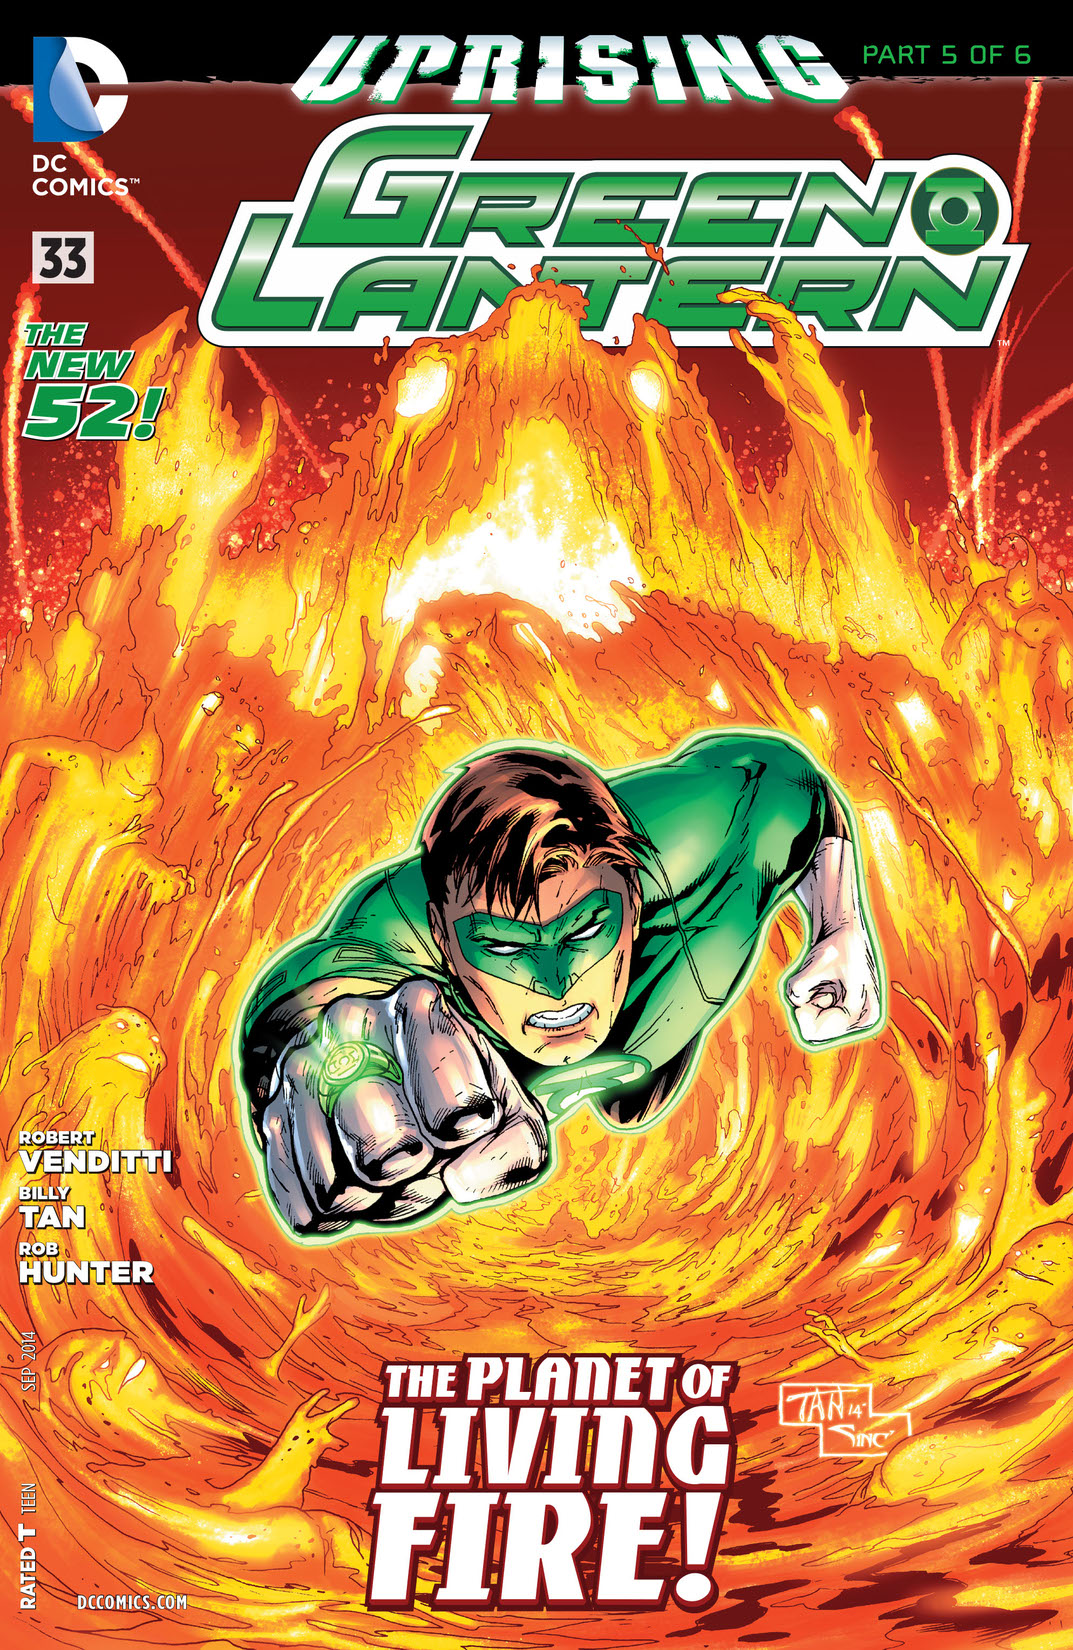 Green Lantern (2011-) #33 preview images